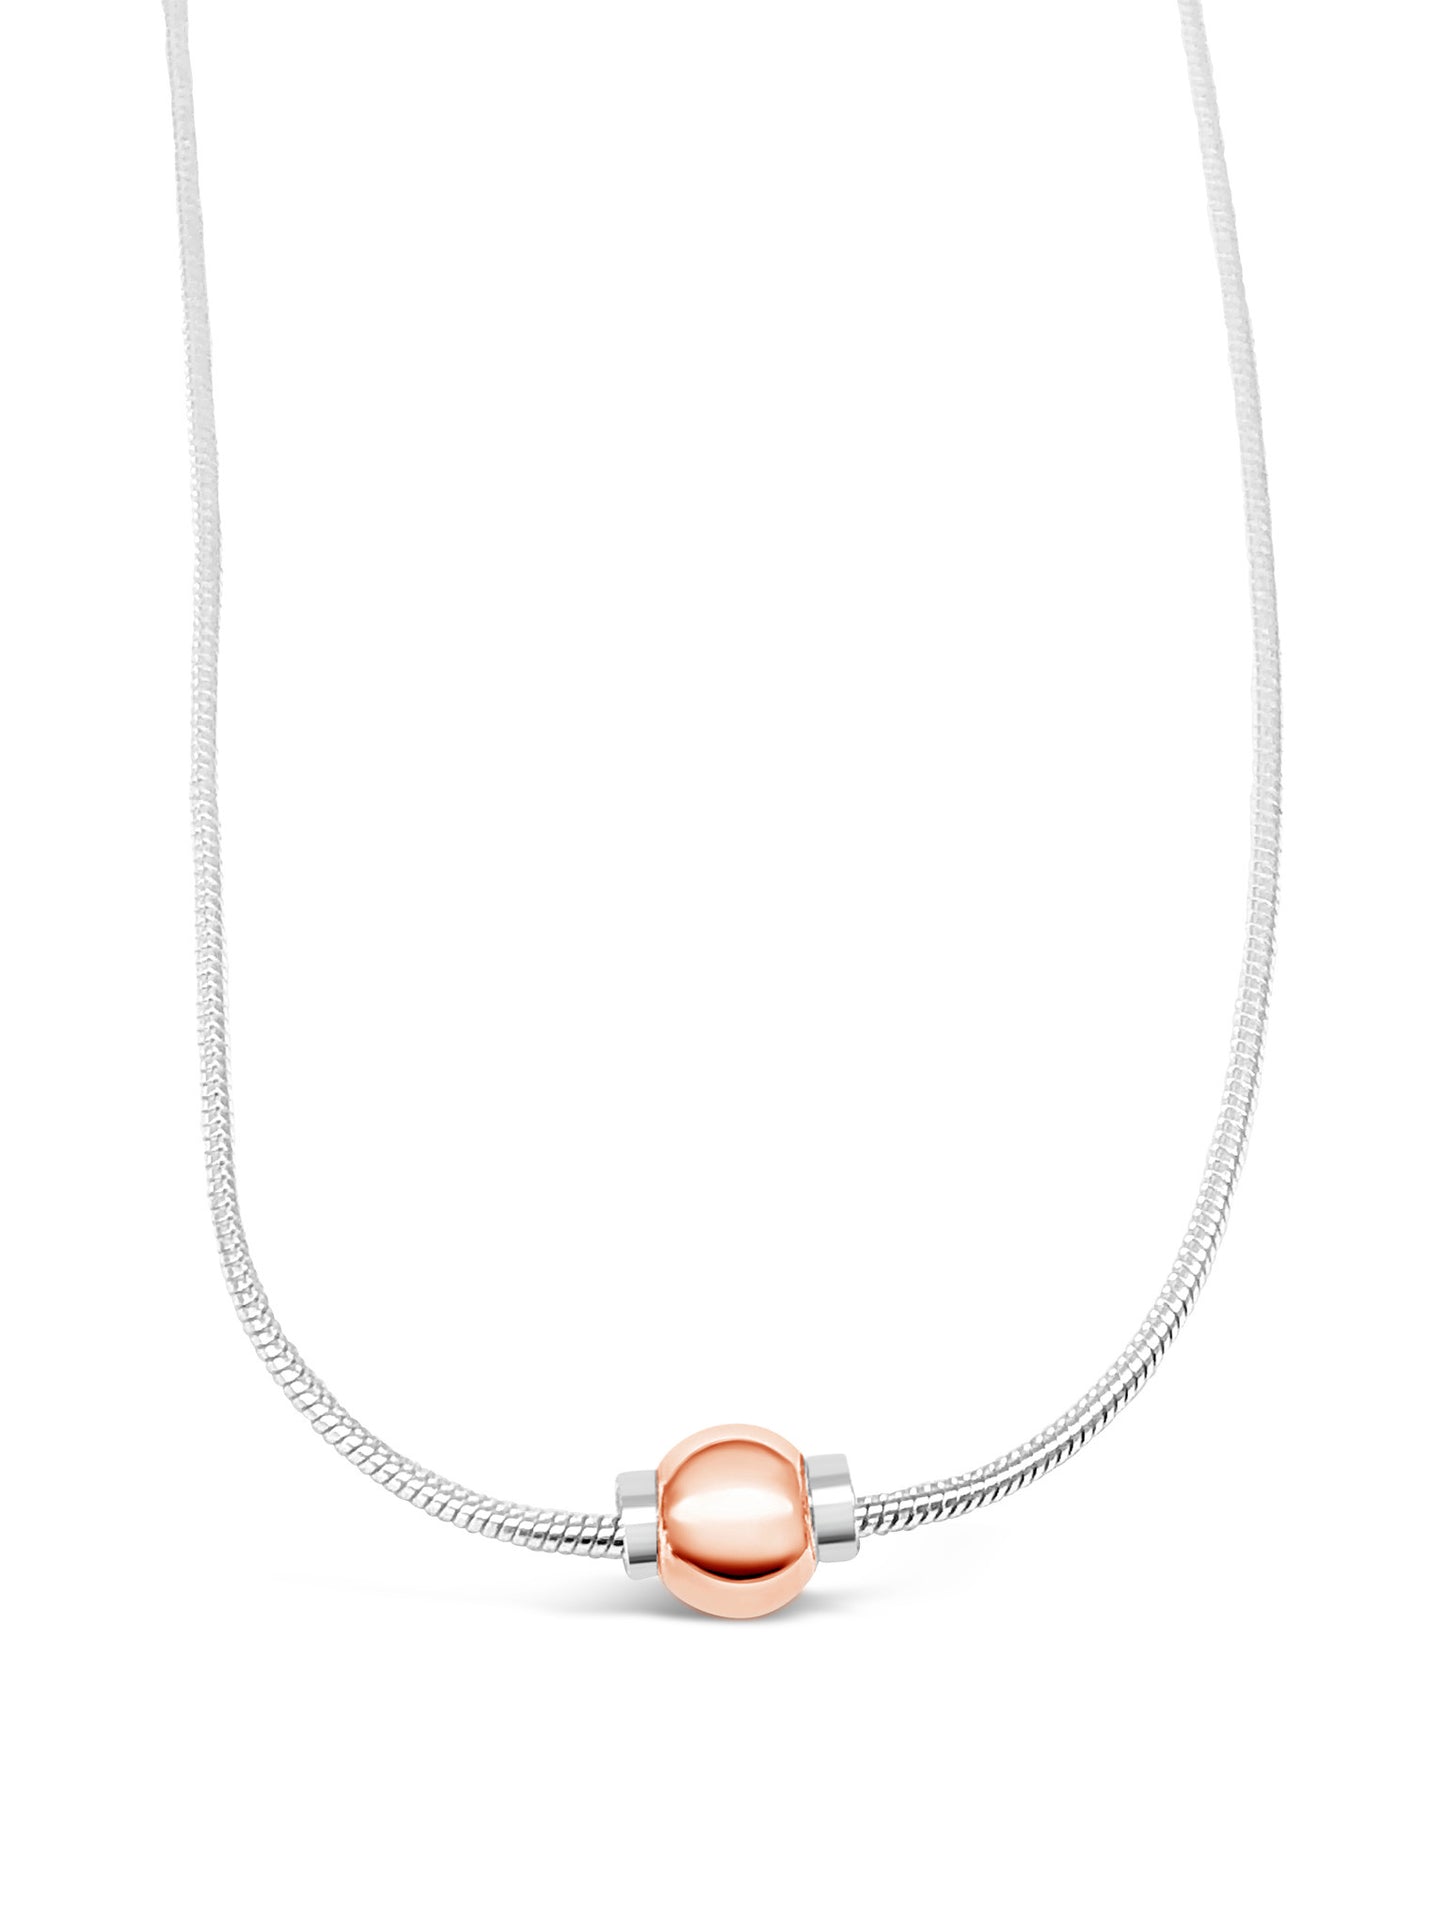 Made on Cape Cod. Beachball Necklace with a 14k rose gold beachball and 925 sterling silver chain